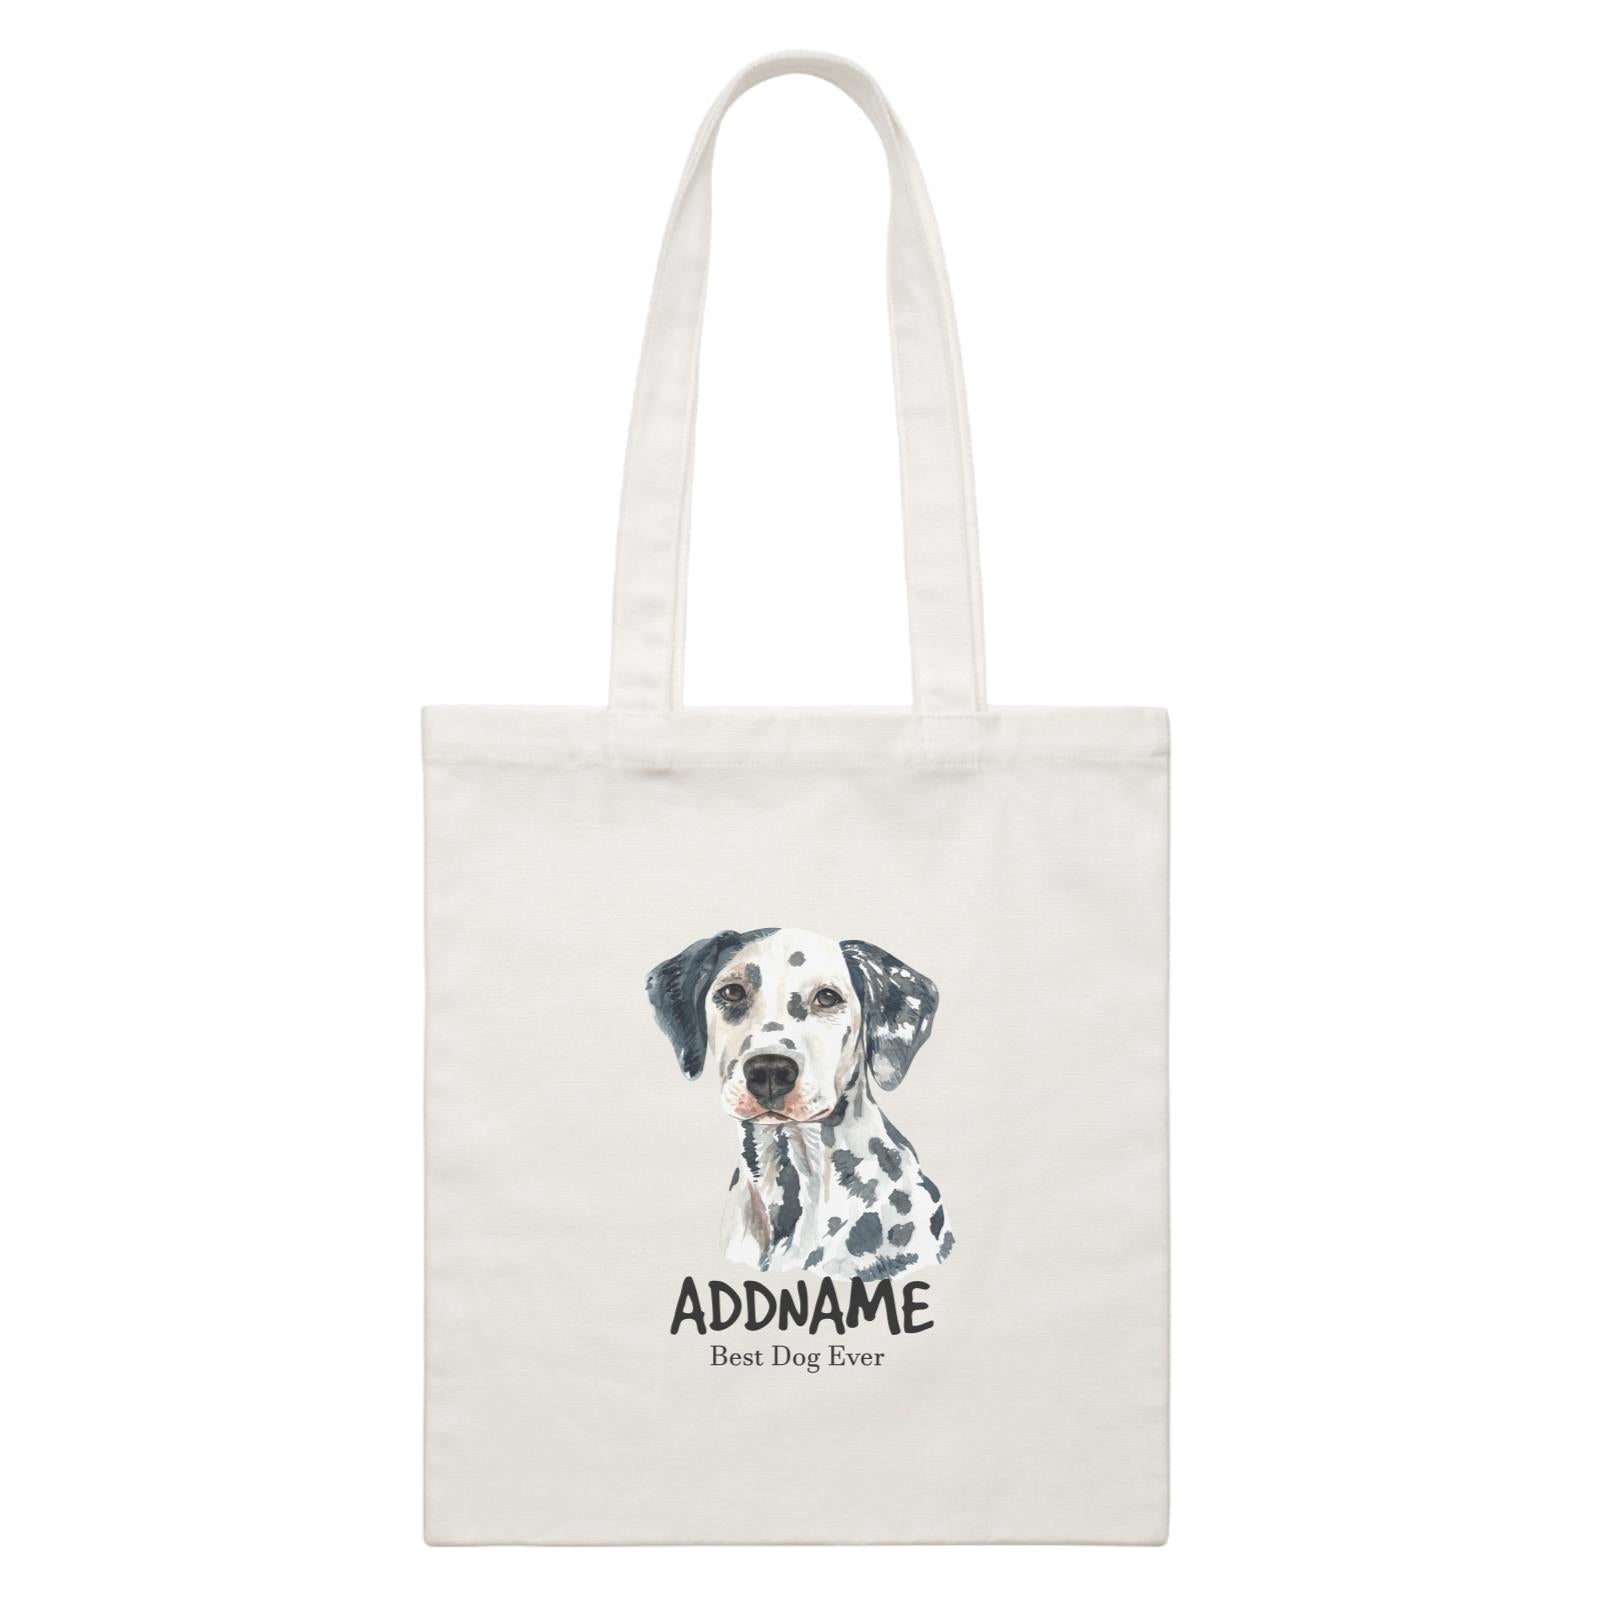 Watercolor Dog Dalmatian Front Best Dog Ever Addname White Canvas Bag